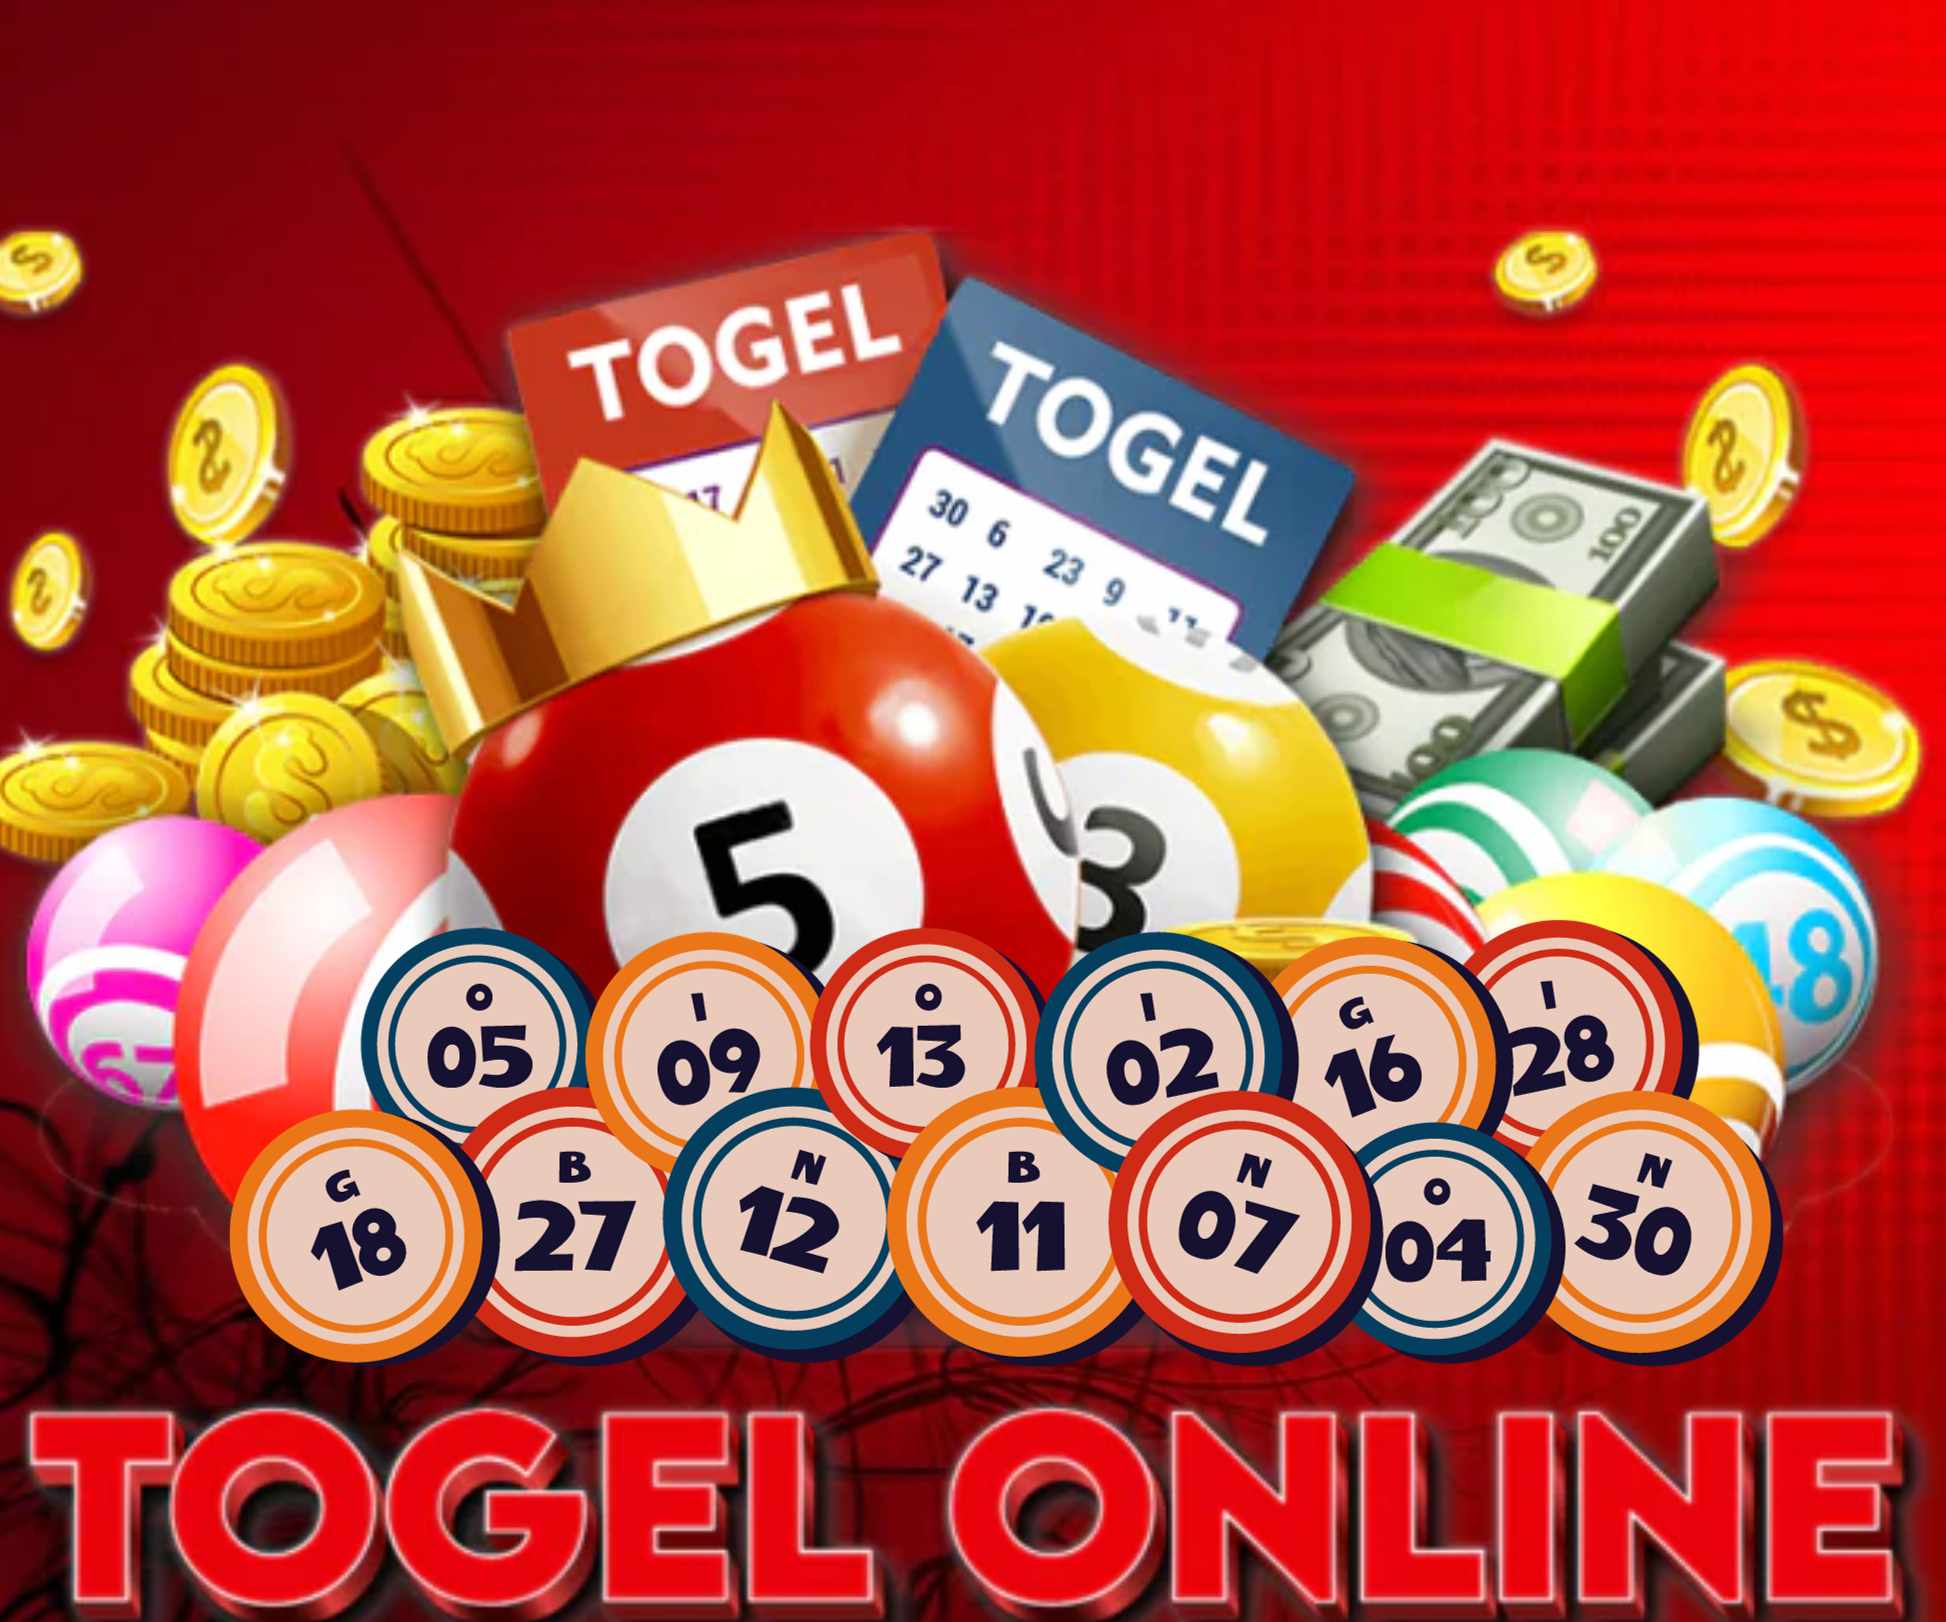 Togel is a game of guessing unimaginable numbers